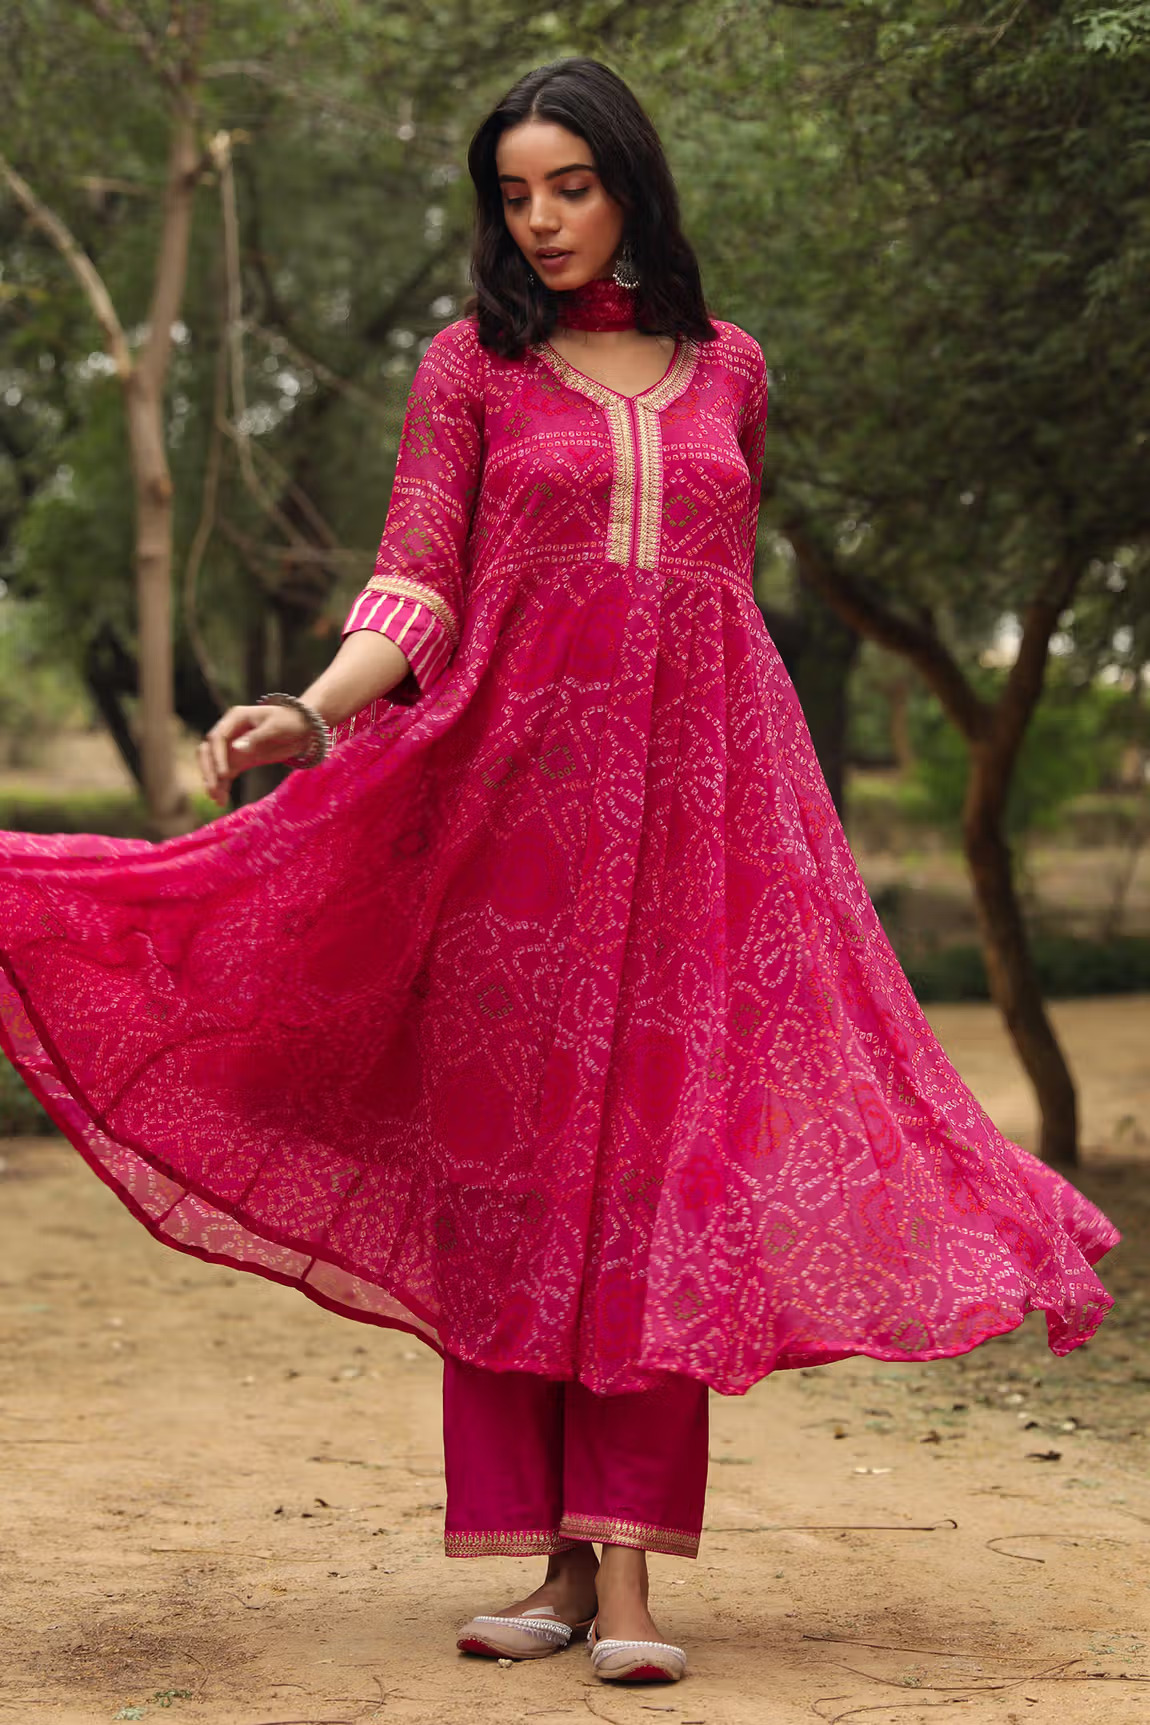 How To Style A Long Kurti With Different Bottom Wear?